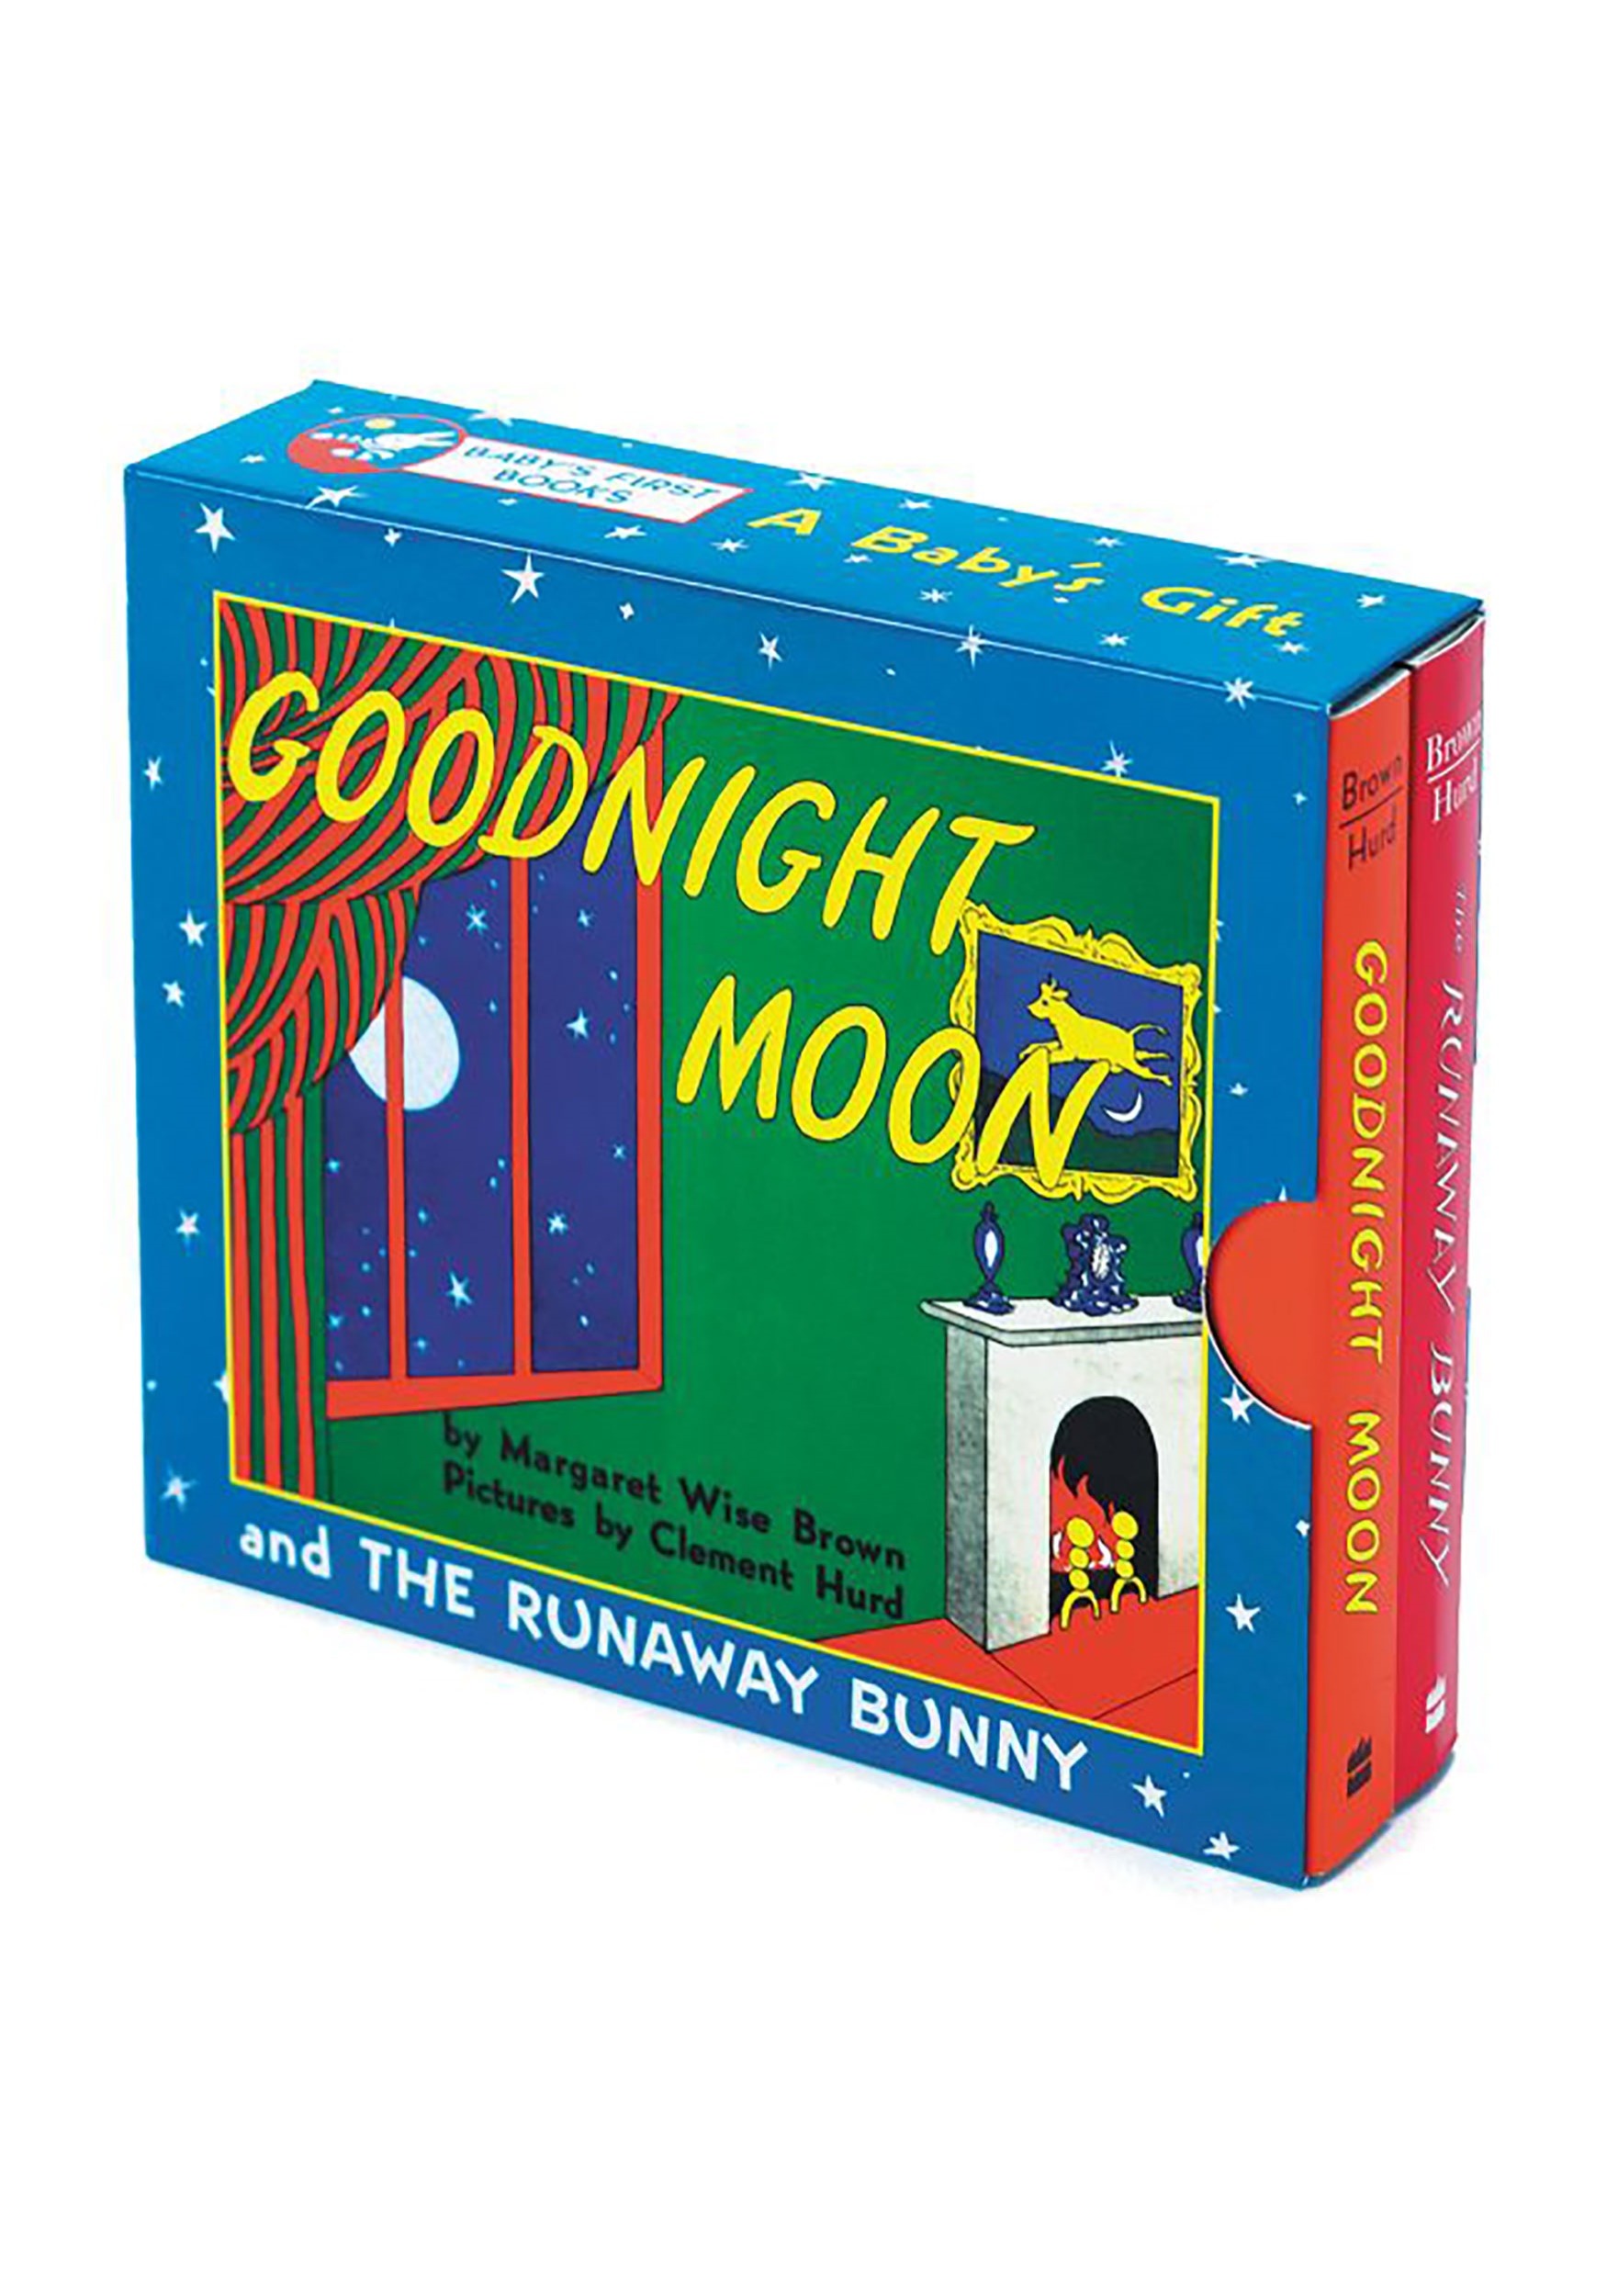 Book Set A Babys Gift: Goodnight Moon and The Runaway Bunny Board